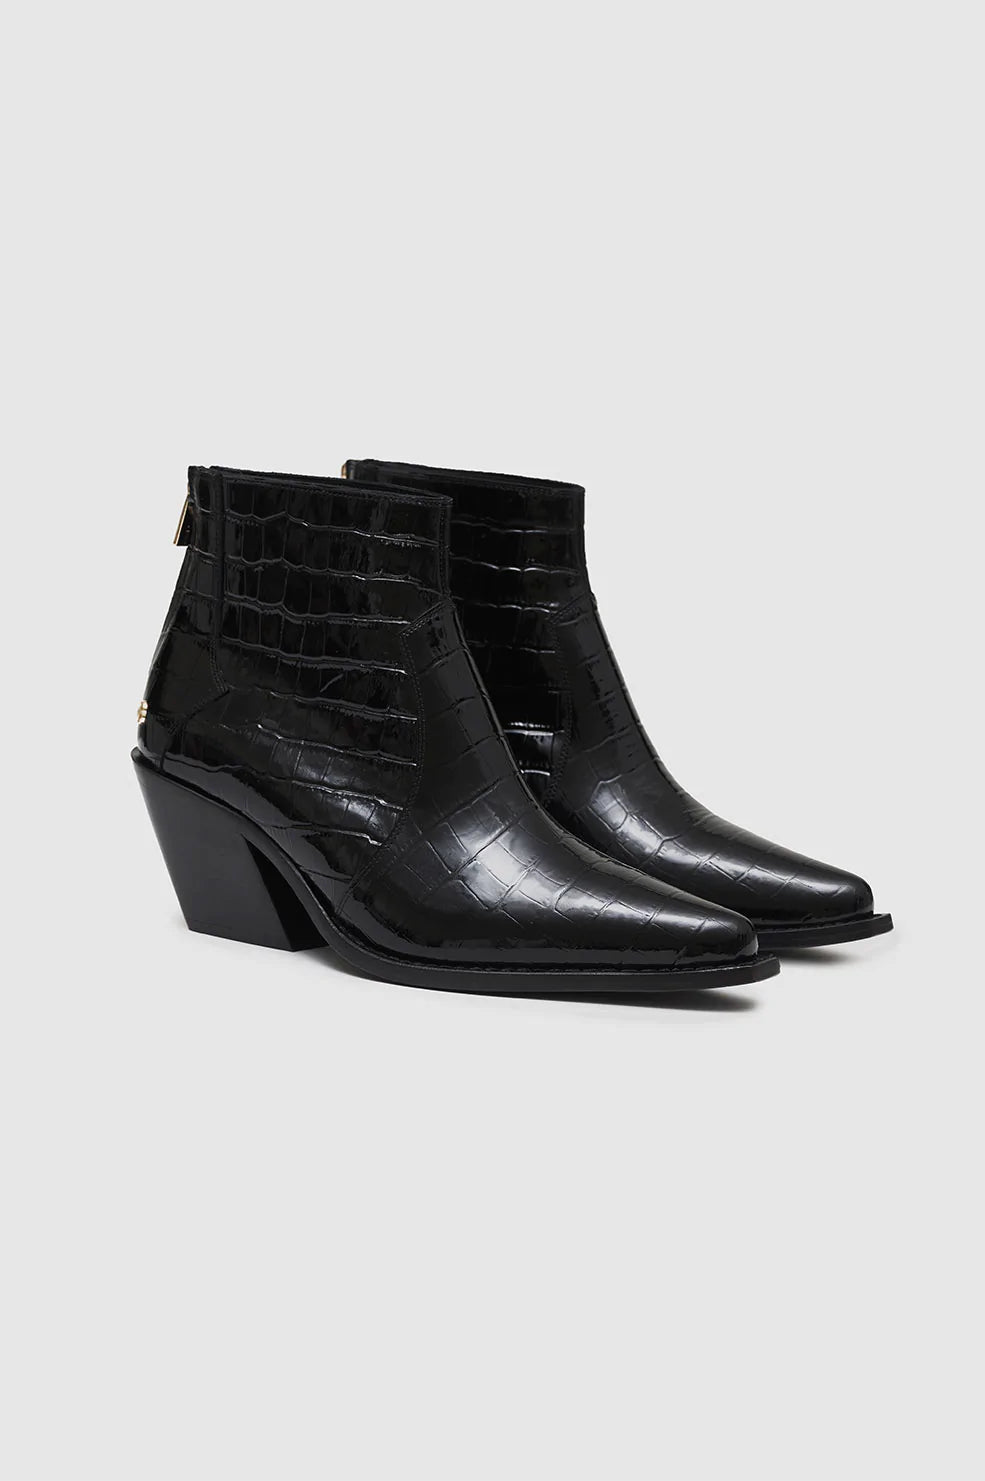 Tania Boots in Black Embossed